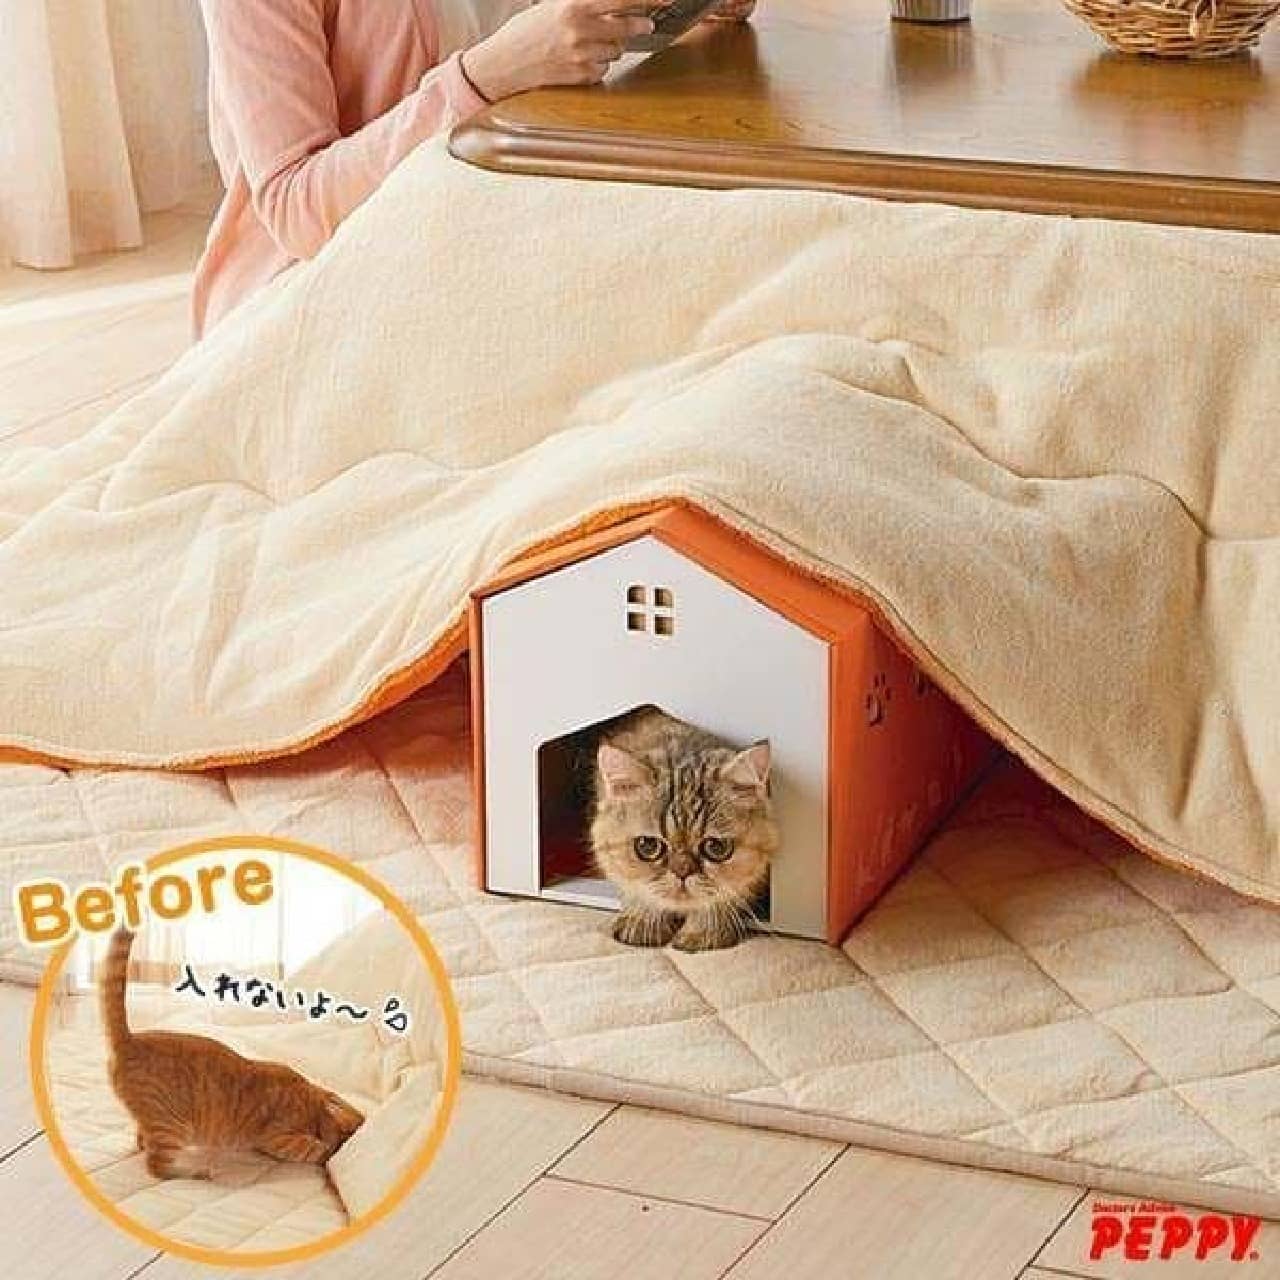 When I passed through the tunnel, it was in the kotatsu, wasn't it magic?